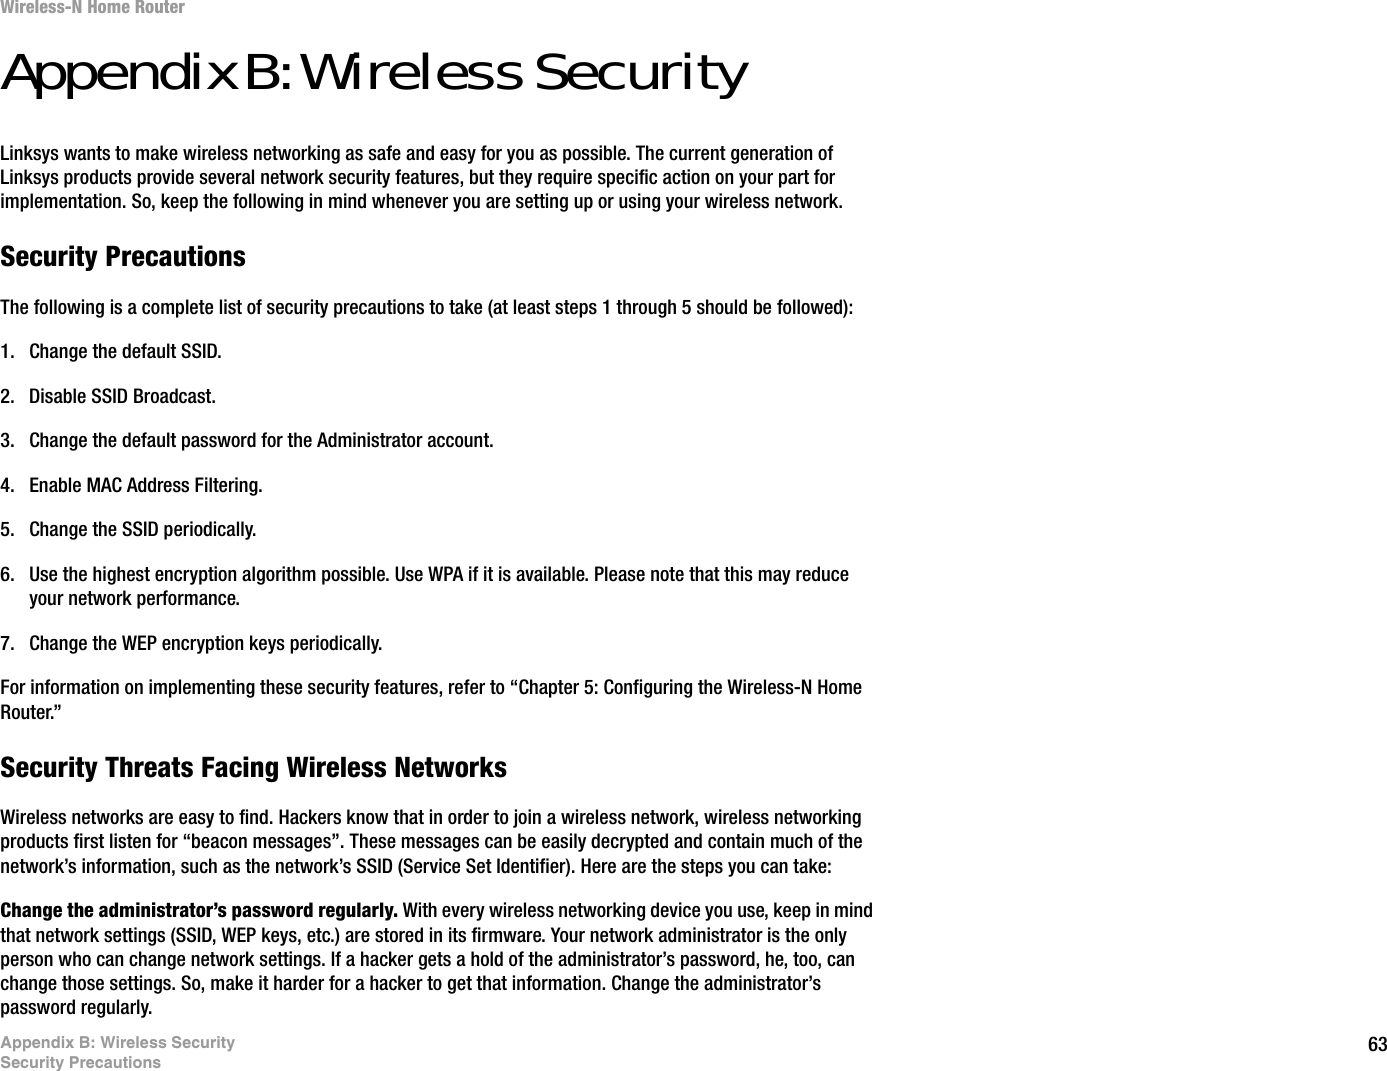 63Appendix B: Wireless SecuritySecurity PrecautionsWireless-N Home RouterAppendix B: Wireless SecurityLinksys wants to make wireless networking as safe and easy for you as possible. The current generation of Linksys products provide several network security features, but they require specific action on your part for implementation. So, keep the following in mind whenever you are setting up or using your wireless network.Security PrecautionsThe following is a complete list of security precautions to take (at least steps 1 through 5 should be followed):1. Change the default SSID. 2. Disable SSID Broadcast. 3. Change the default password for the Administrator account. 4. Enable MAC Address Filtering. 5. Change the SSID periodically. 6. Use the highest encryption algorithm possible. Use WPA if it is available. Please note that this may reduce your network performance. 7. Change the WEP encryption keys periodically. For information on implementing these security features, refer to “Chapter 5: Configuring the Wireless-N Home Router.”Security Threats Facing Wireless Networks Wireless networks are easy to find. Hackers know that in order to join a wireless network, wireless networking products first listen for “beacon messages”. These messages can be easily decrypted and contain much of the network’s information, such as the network’s SSID (Service Set Identifier). Here are the steps you can take:Change the administrator’s password regularly. With every wireless networking device you use, keep in mind that network settings (SSID, WEP keys, etc.) are stored in its firmware. Your network administrator is the only person who can change network settings. If a hacker gets a hold of the administrator’s password, he, too, can change those settings. So, make it harder for a hacker to get that information. Change the administrator’s password regularly.